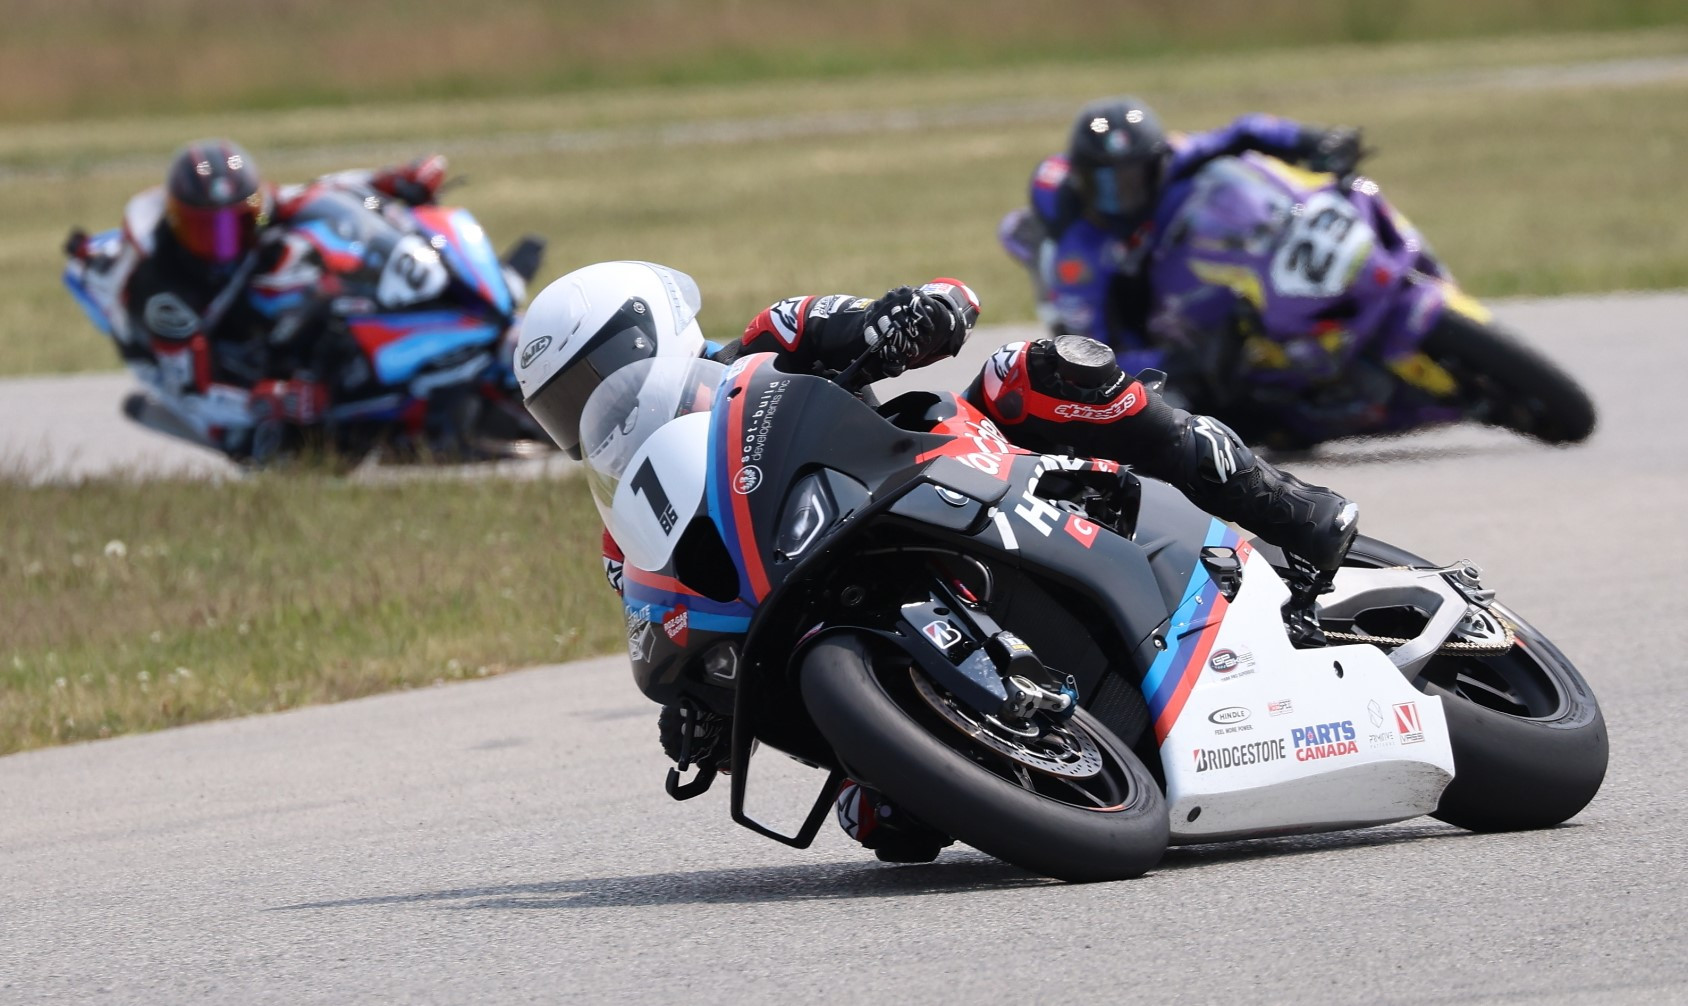 The top three in the Canadian Pro Superbike championship remain unchanged after the trip to Nova Scotia, with the cancellation of round three due to severe flood damage near Atlantic Motorsport Park. Defending champion Ben Young (1) currently trails Alex Dumas (23) in the standings, with Sam Guerin (2) third. Photo by Rob O'Brien, courtesy CSBK.